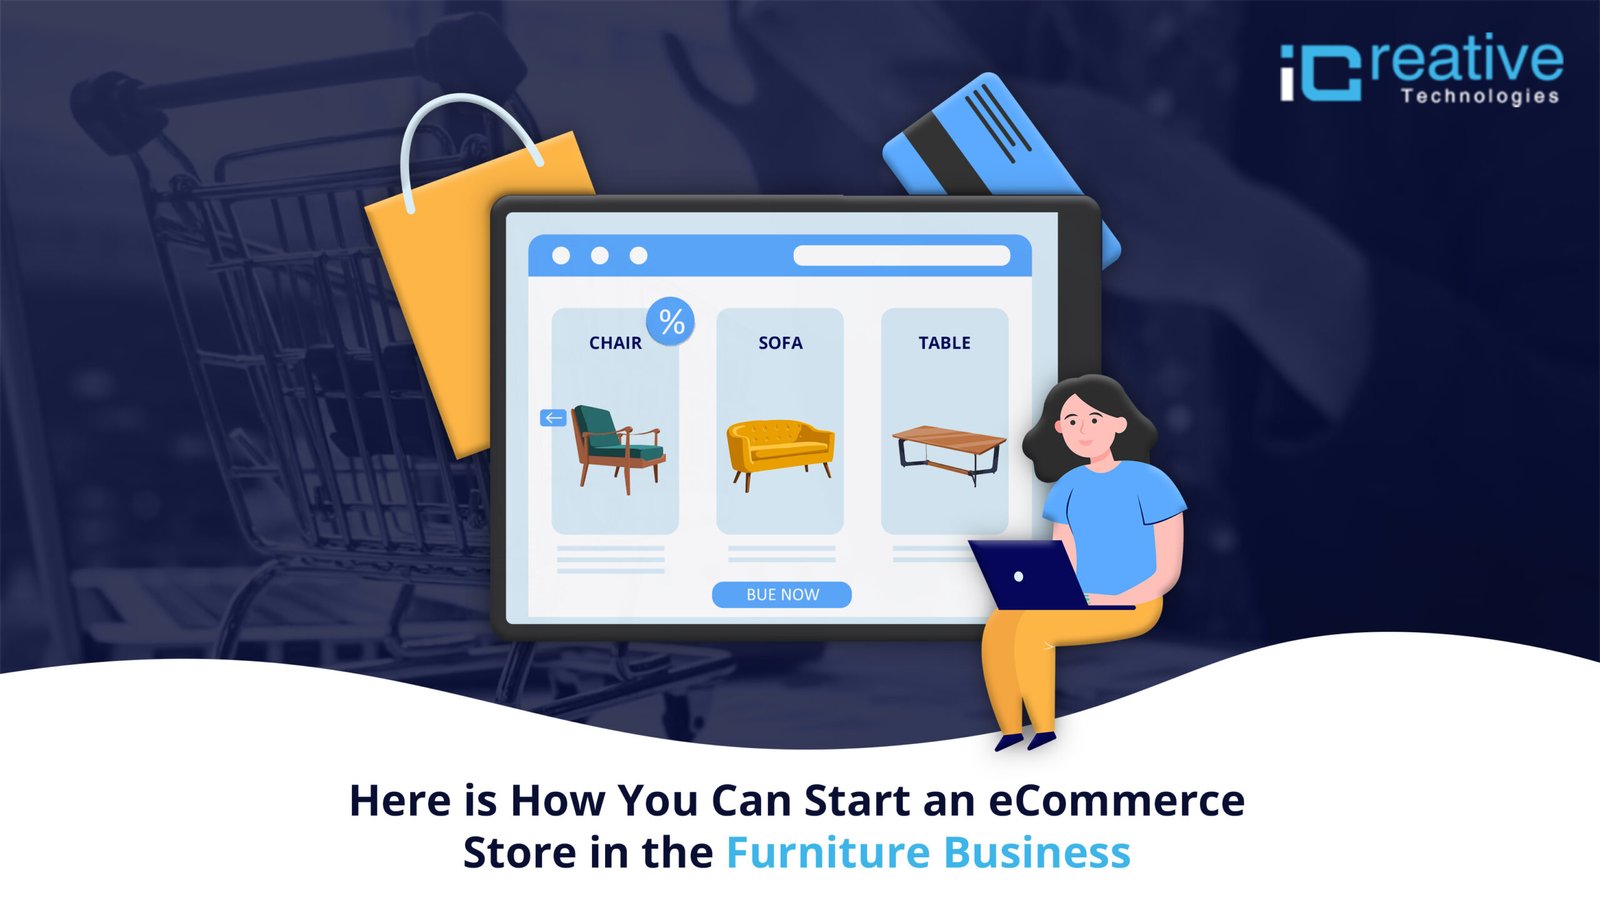 Tips for Starting Your Furniture eCommerce Business